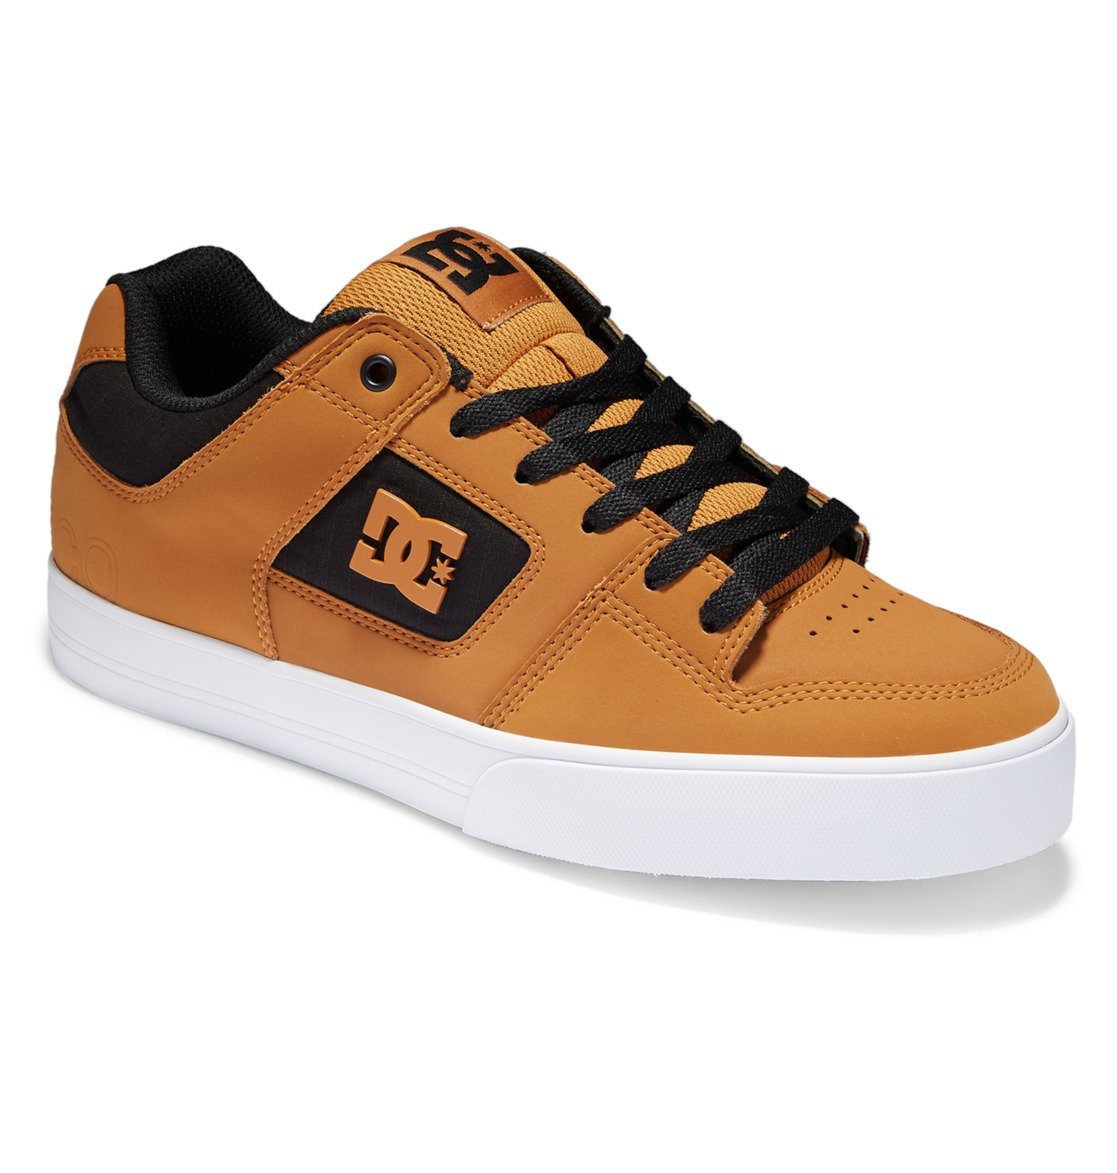 DC Shoes Pure Sneaker Dk Choco/Black/Oyster